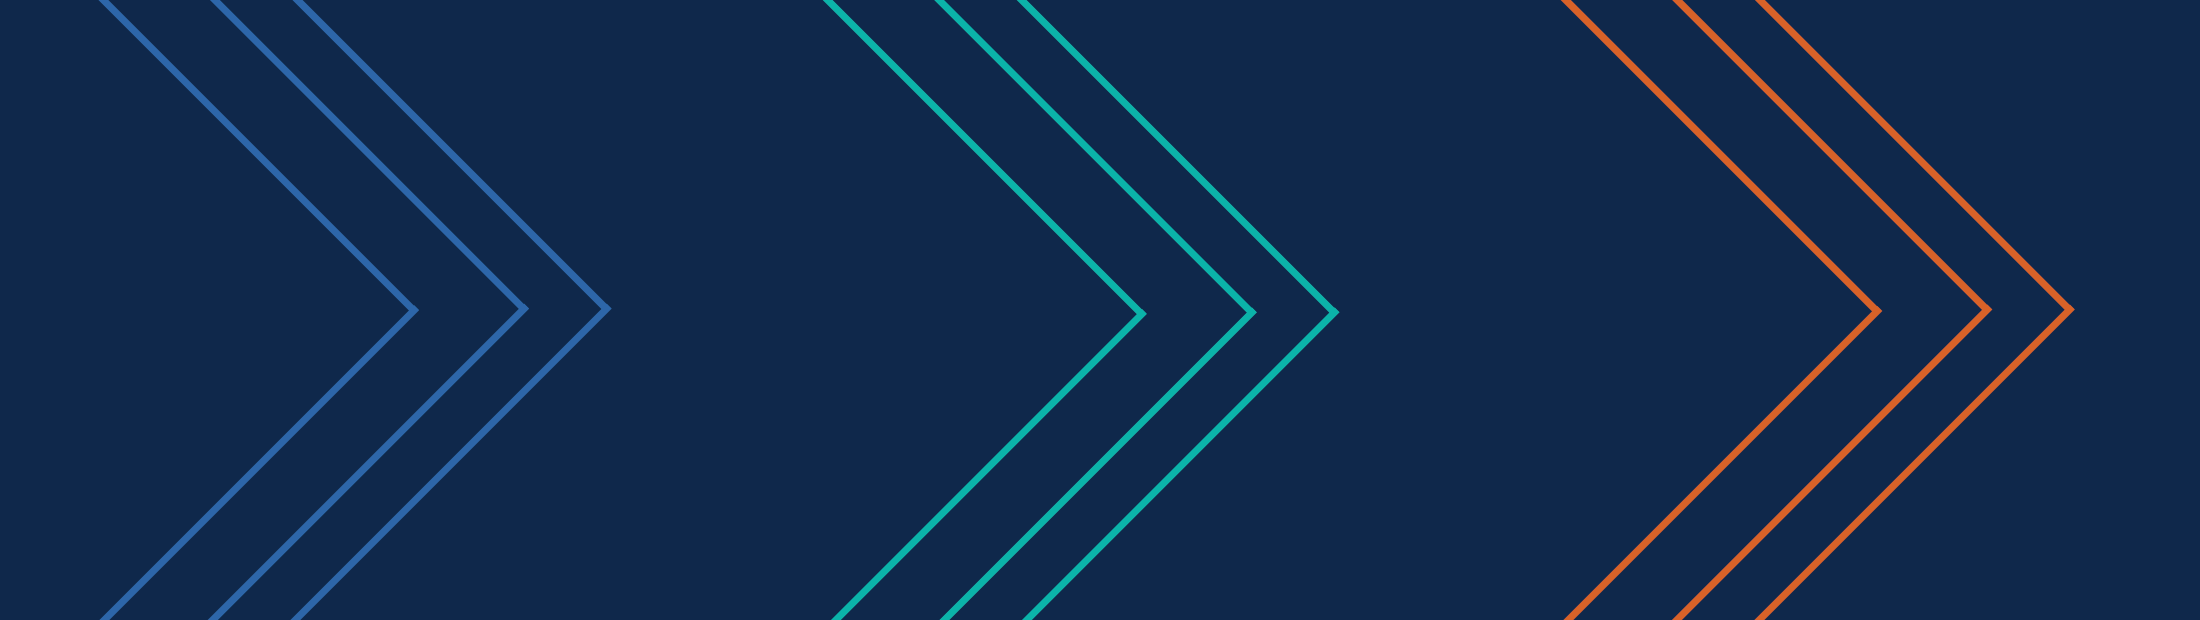 A dark blue background with light blue, green and orange arrows on it